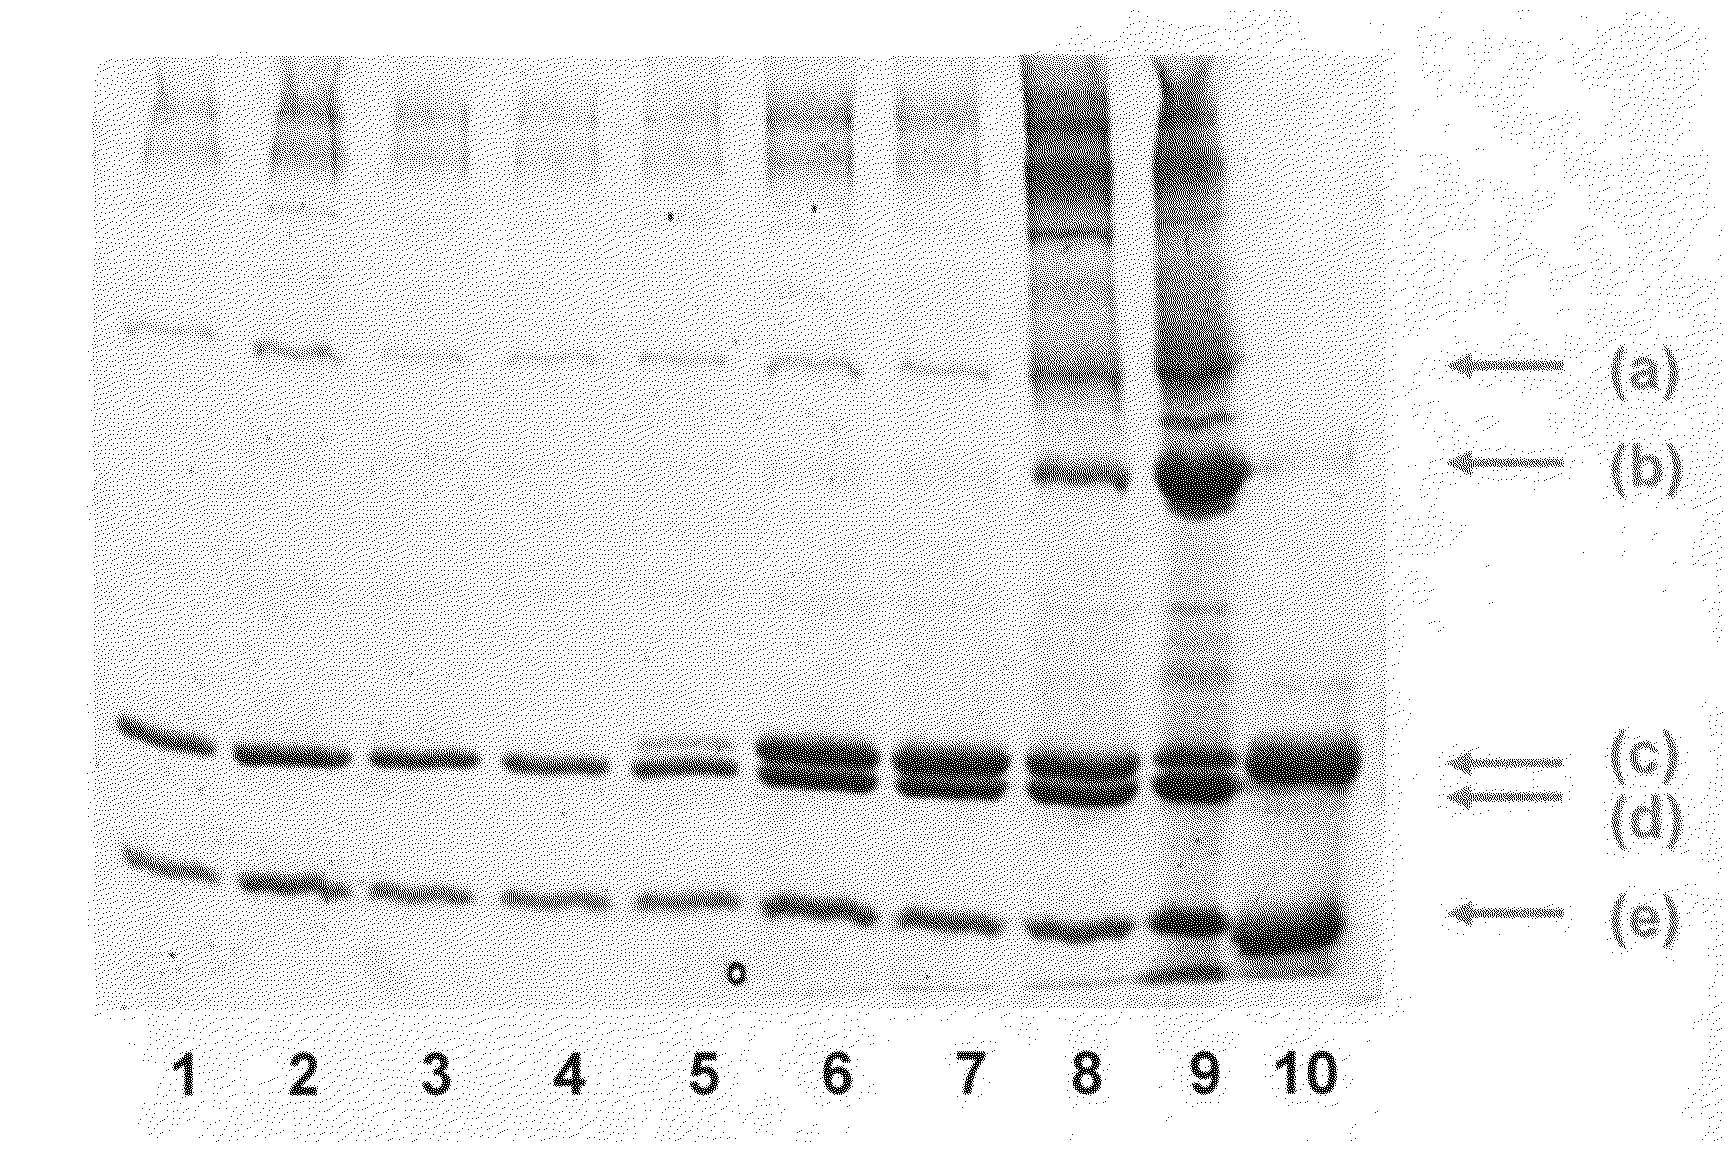 Method for Concentrating, Purifying and Removing Prion Protein